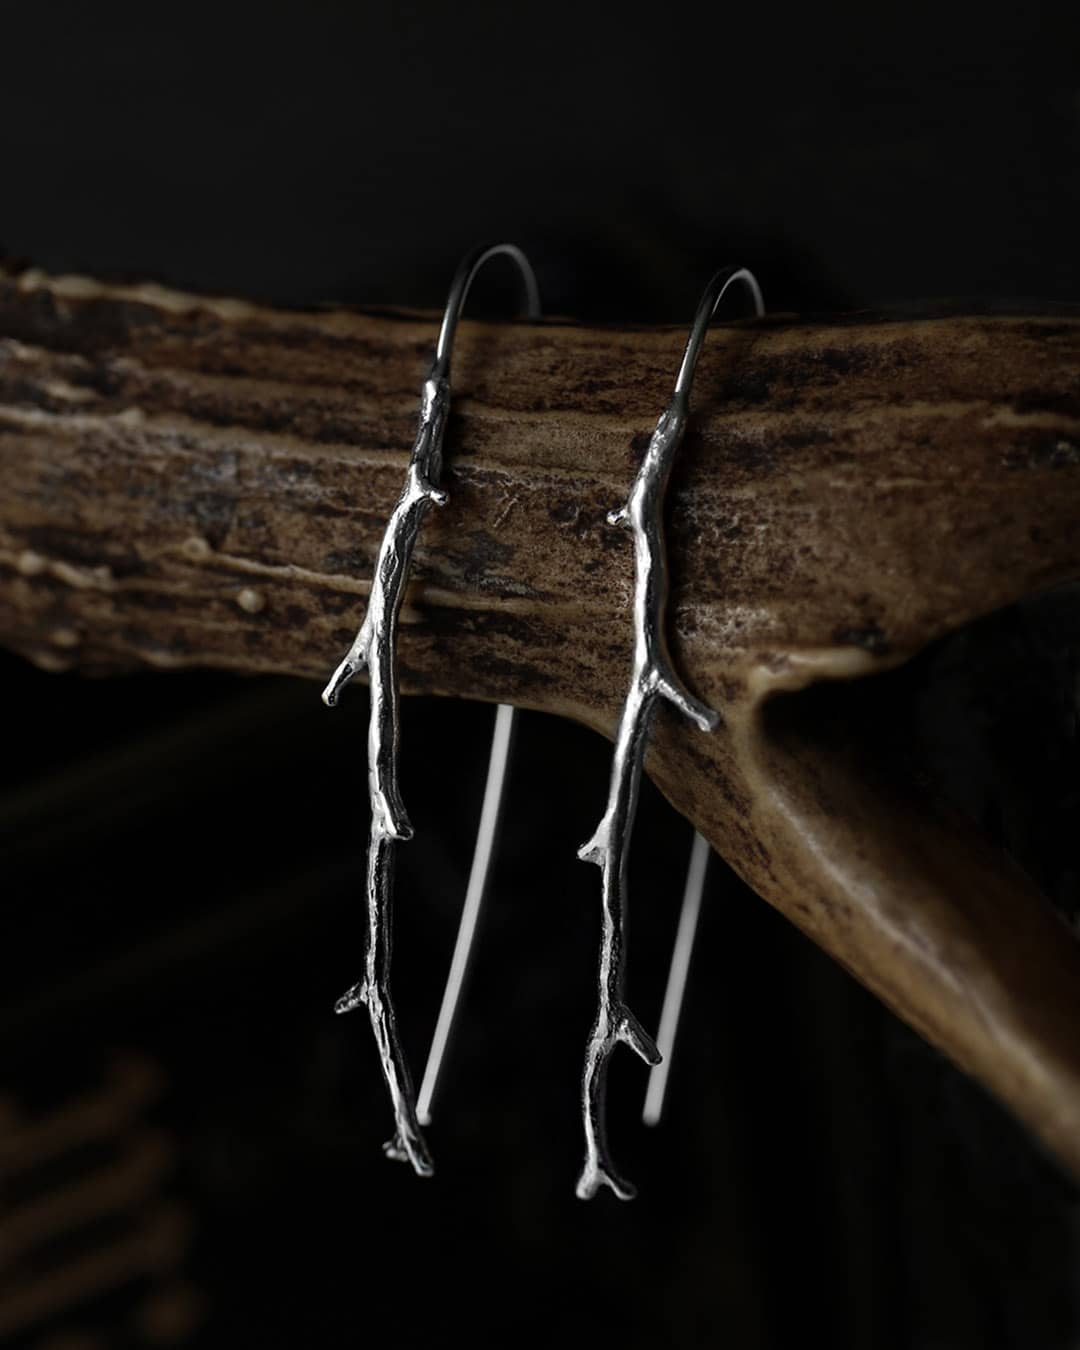 Sterling Silver branch earrings, shaped as bare branches without leaves